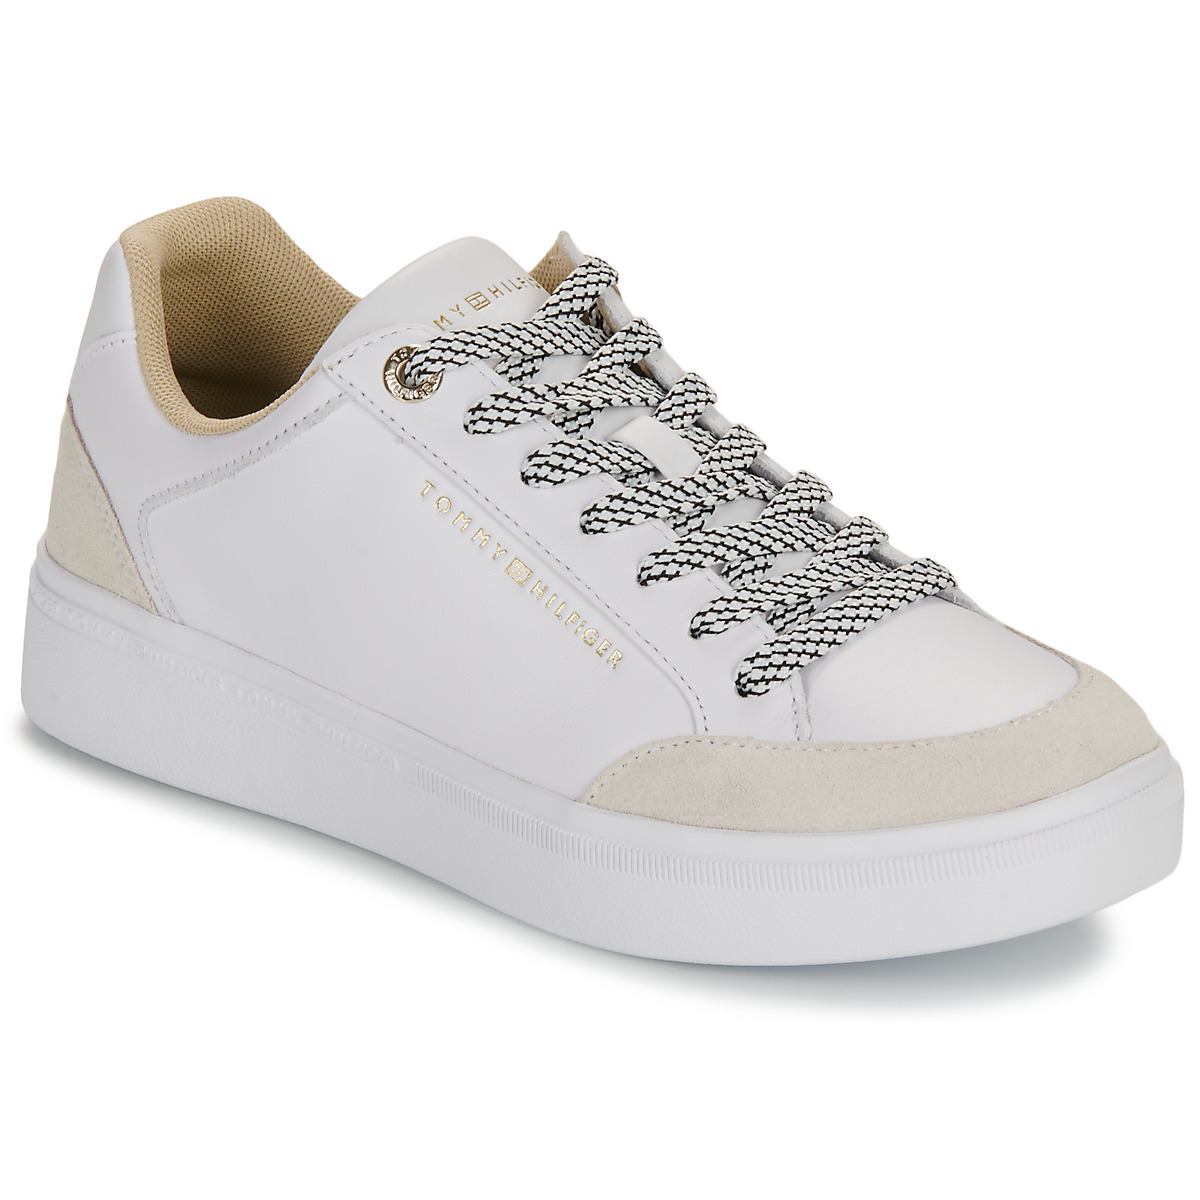 Chaussures Femme Baskets basses Tommy Hilfiger CUPSOLE SNEAKER 